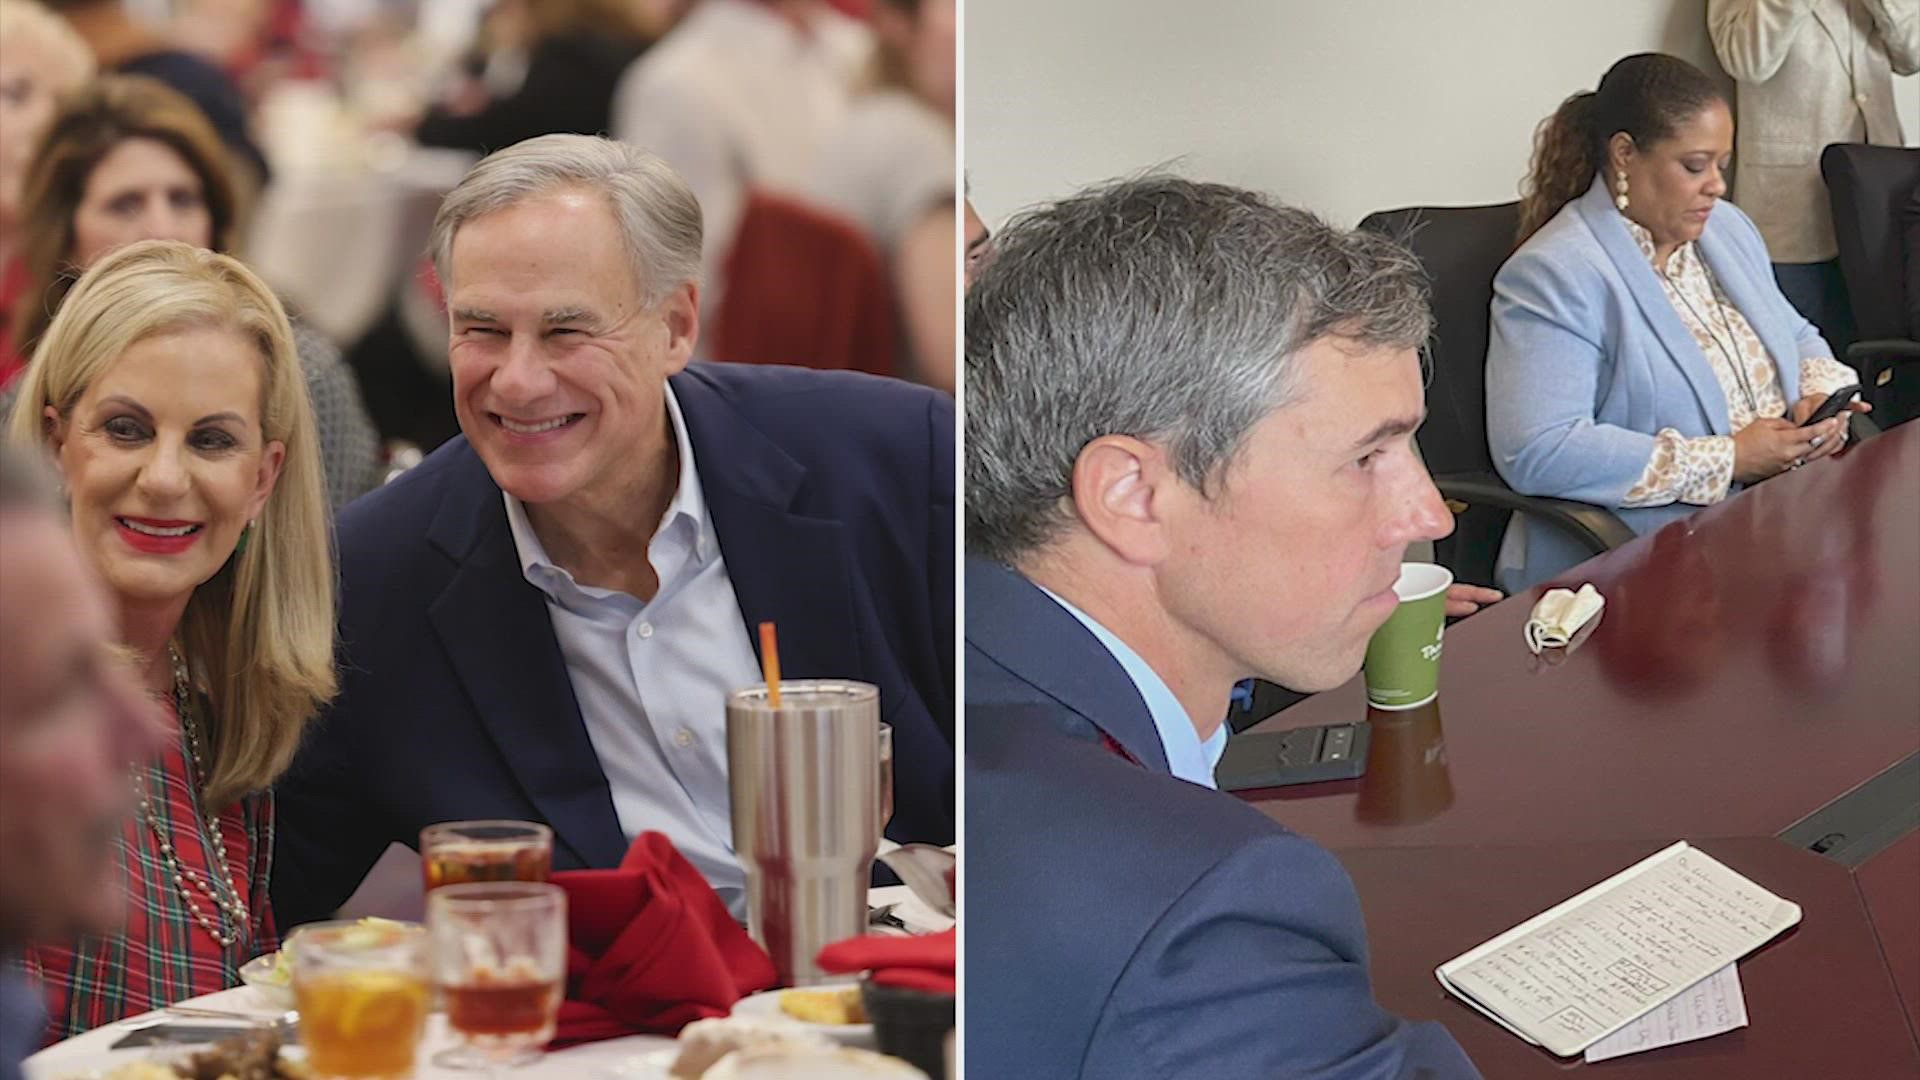 At the Fort Bend County Fairgrounds in Rosenberg, O'Rourke accused Abbott of giving natural gas companies a loophole to avoid weatherization.